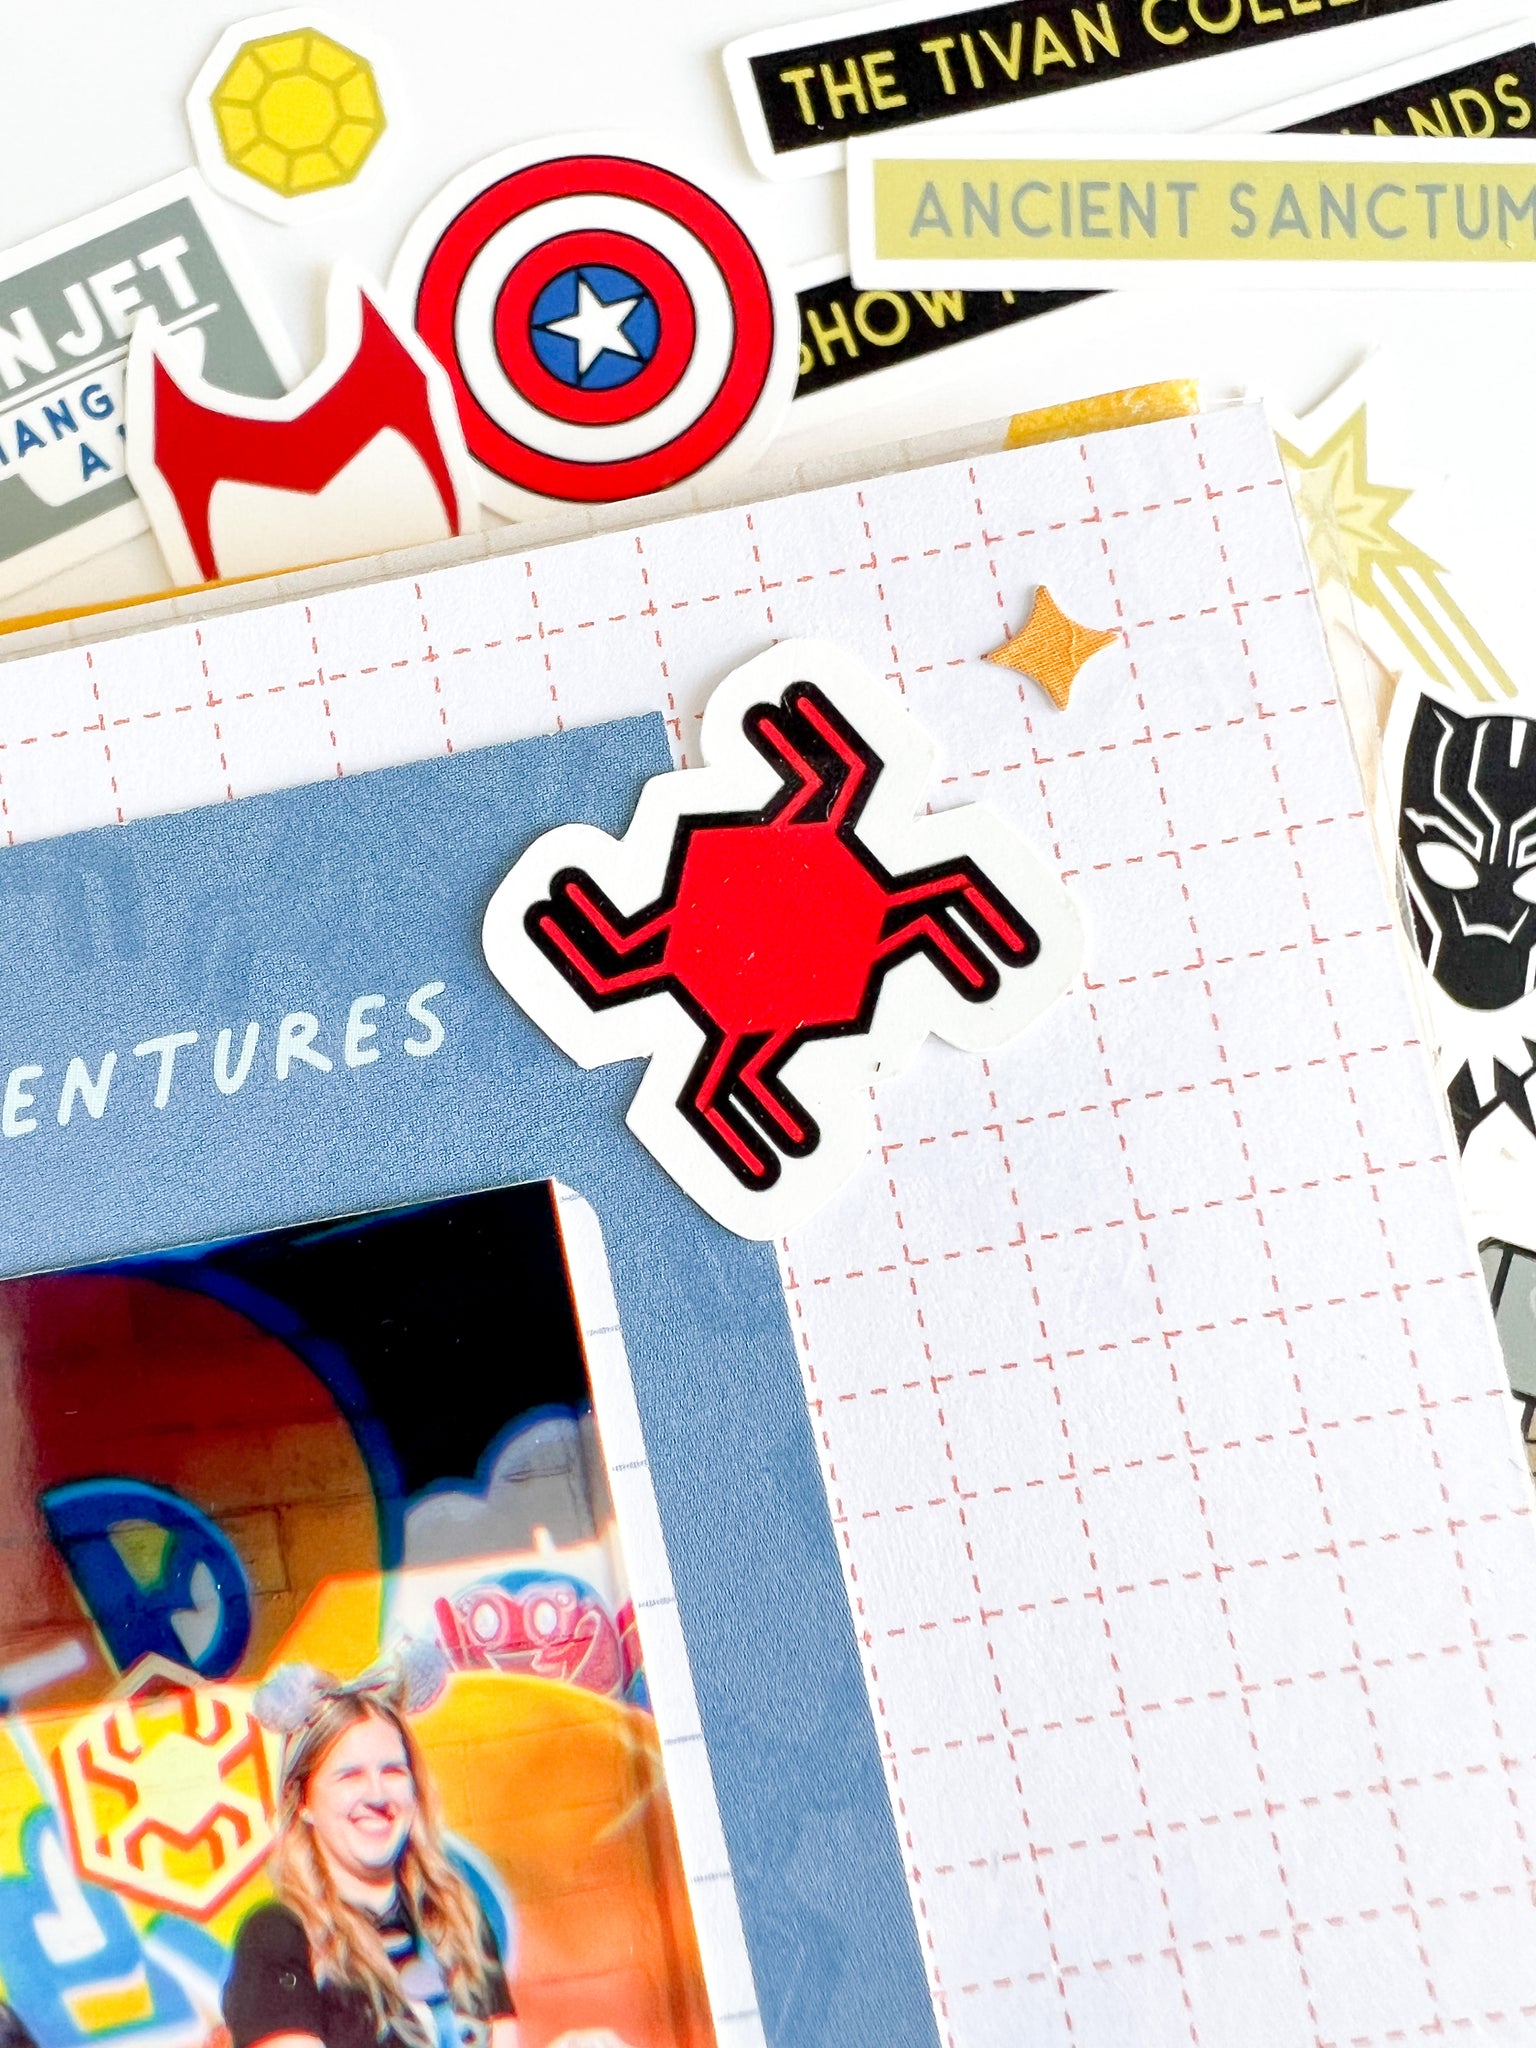 Super heroes, Marvel, Avengers, Avengers campus, Infinity gauntlet, baby groot, Loki, Incredible Hulk, Thor, Antman, Black Widow, Thor's hammer DIY, Guardians of the Galaxy, Mix Tape, Captain America,  Black Panther, California Adventure's Avenger's Campus, Disney Scrapbooking, DIY, Paper crafting, Easy Projects for kids, summer projects for kids, easy summer projects, Dr. Strange